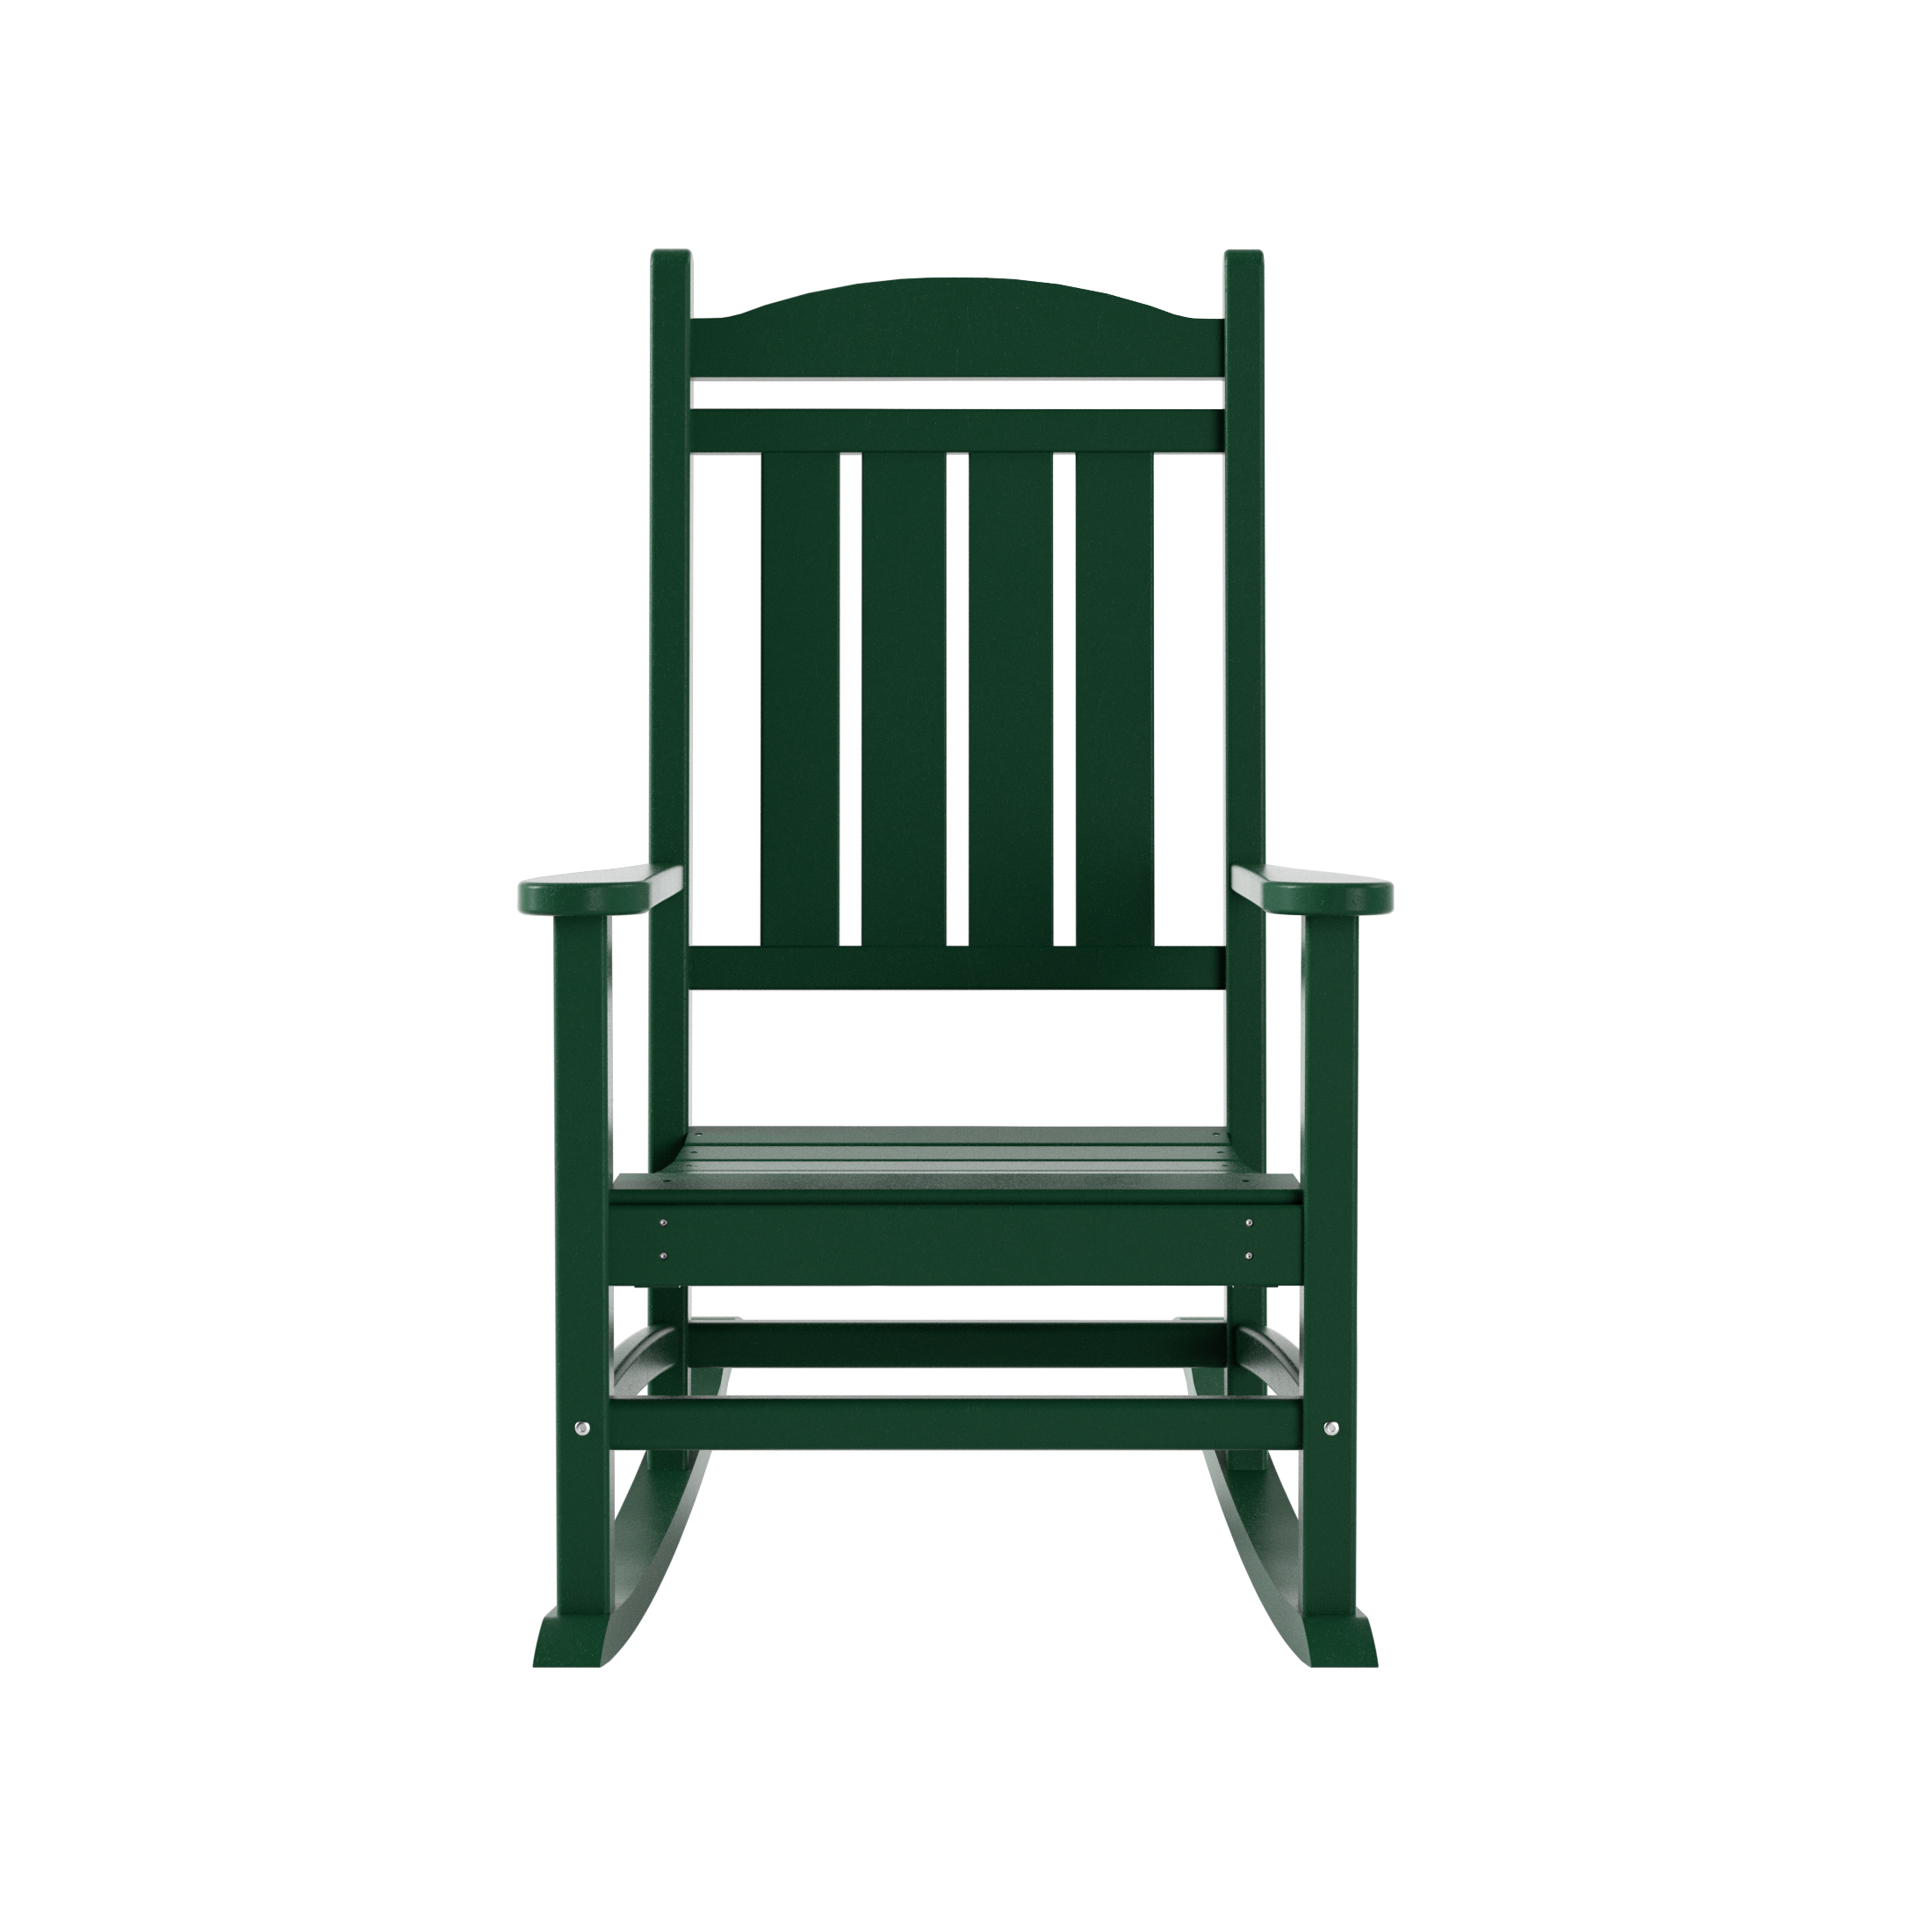 Costaelm Paradise Classic Plastic Outdoor Porch Rocking Chairs (Set of 4), Dark Green - image 3 of 8